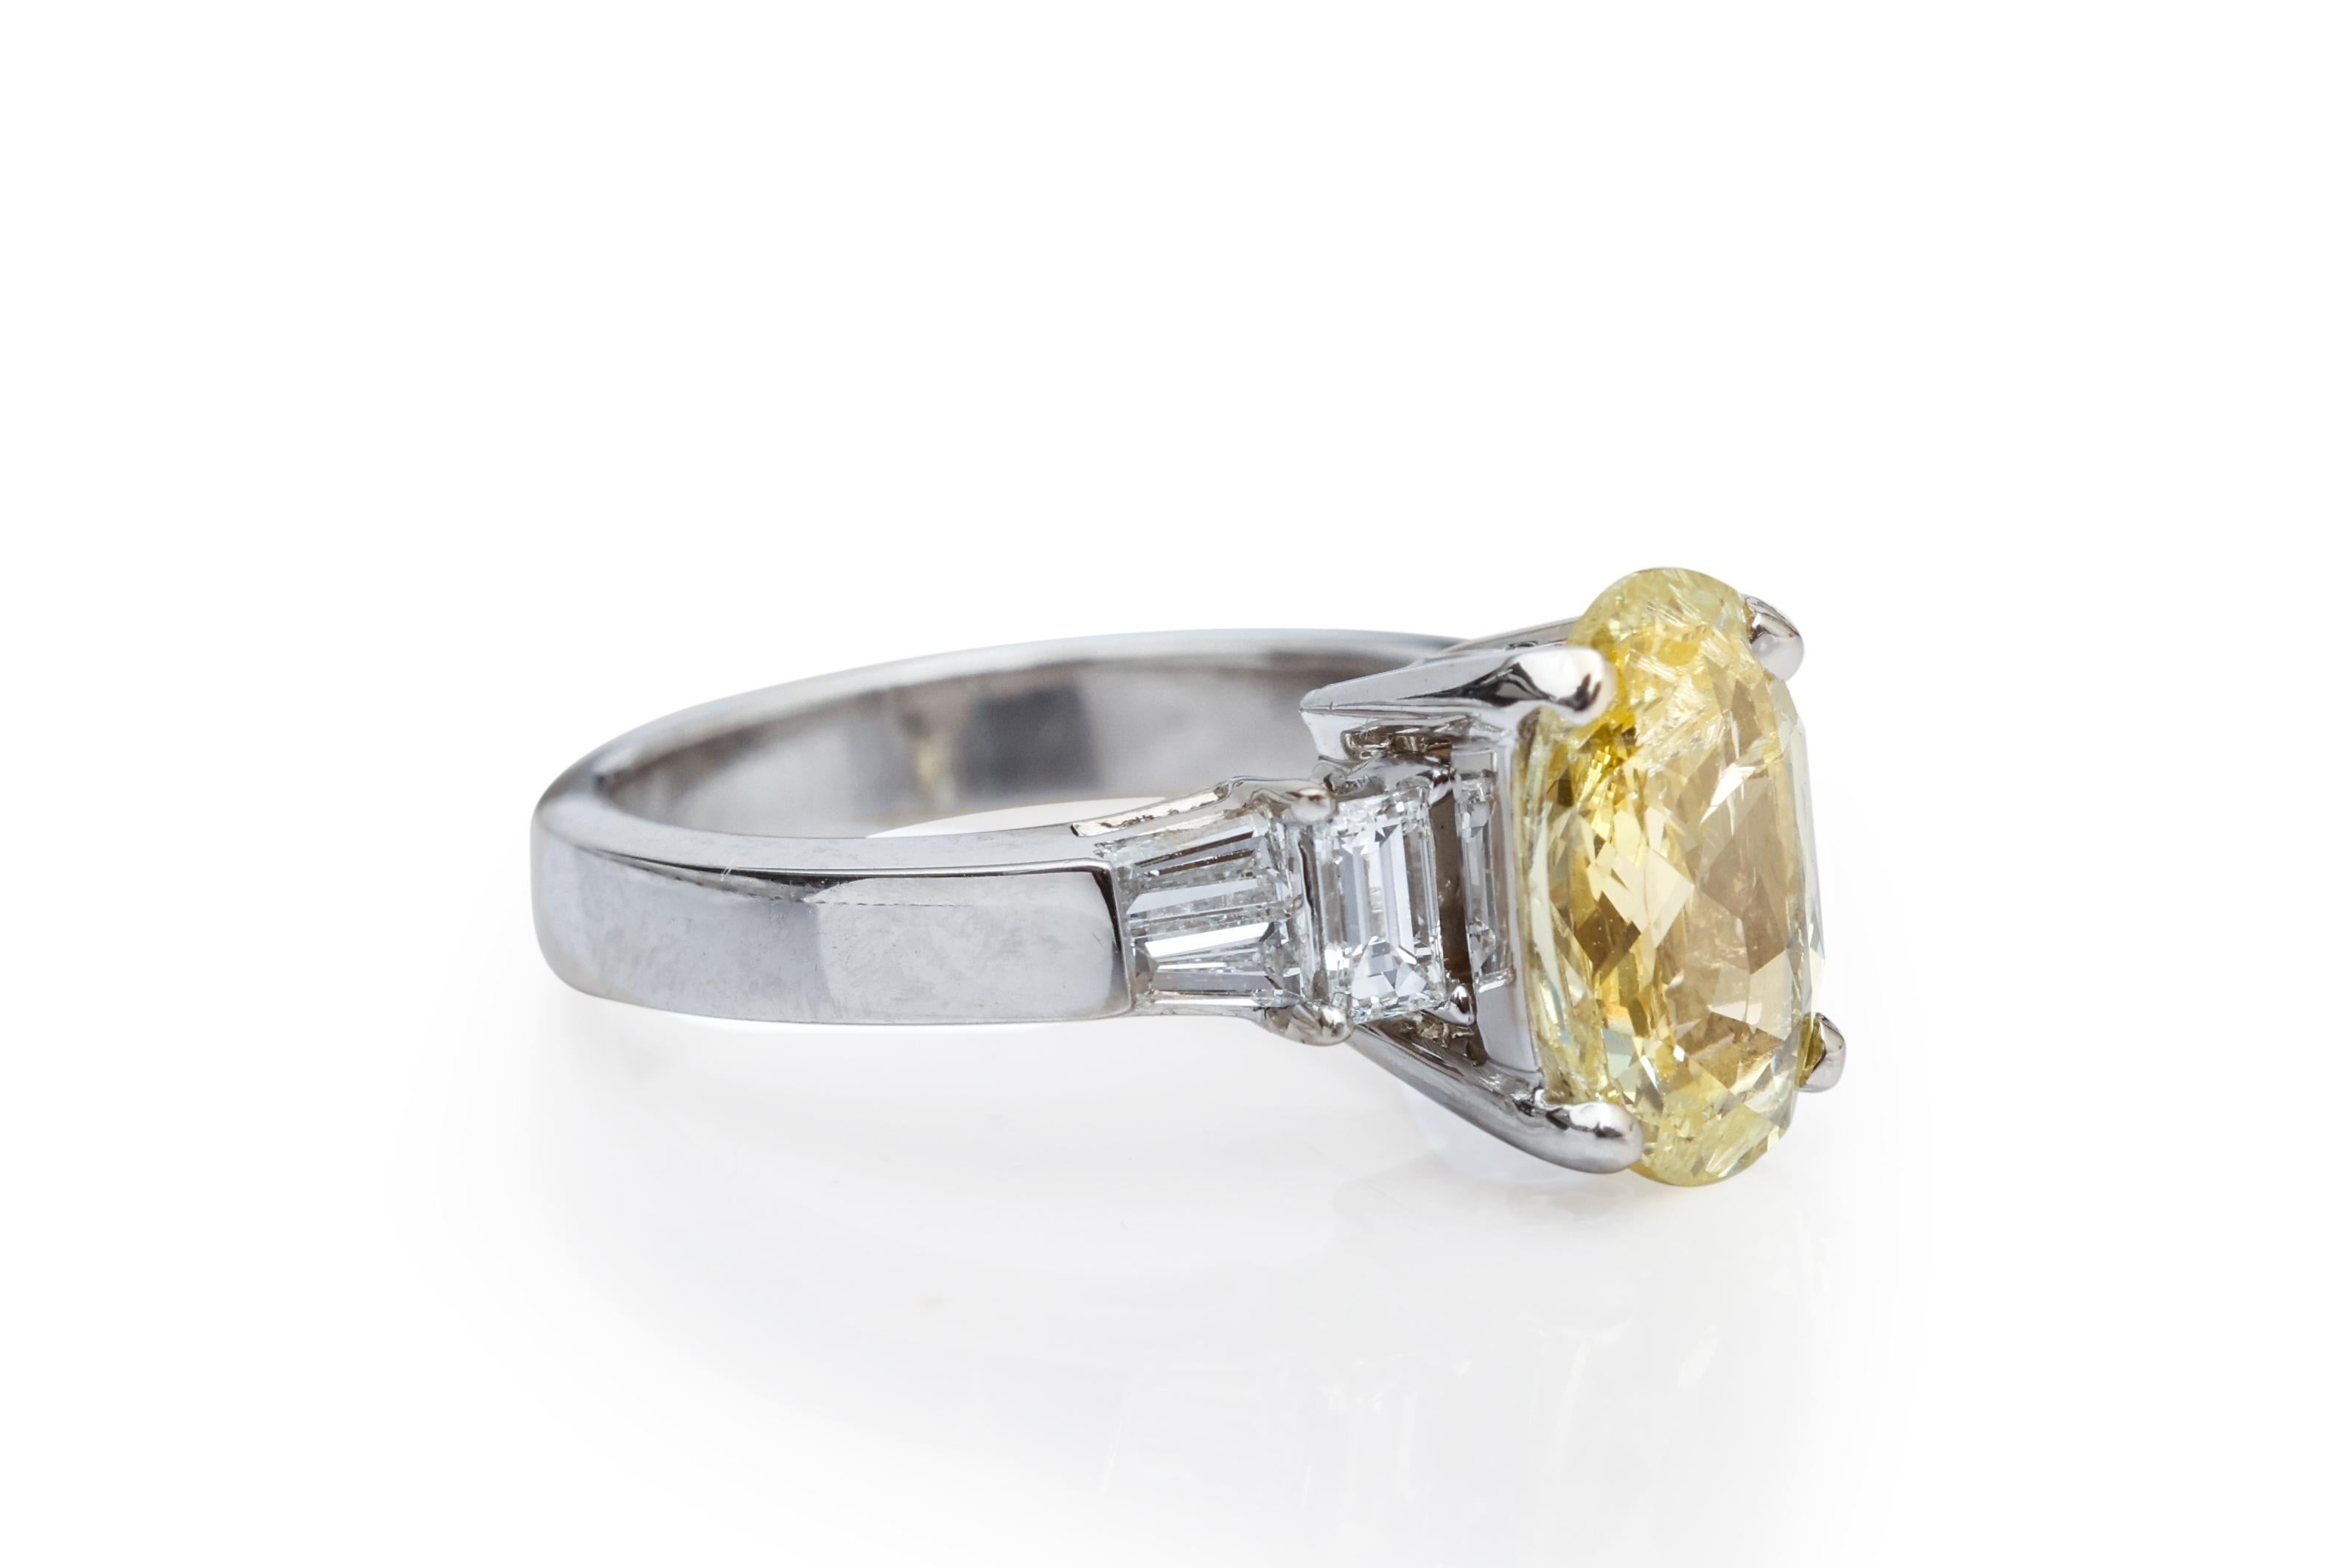 Item Details:
Metal type: Platinum
Weight: 6.9 grams
Ring Size: 4 (resizable)

Diamond Details:
Center Diamond - Canary Yellow
Cut: Oval
Carat: 1.34 carats
Color: Canary Yellow
Clarity: I1

Accent Diamond Details:
Cut: Emerald Cut
Color: G
Clarity: